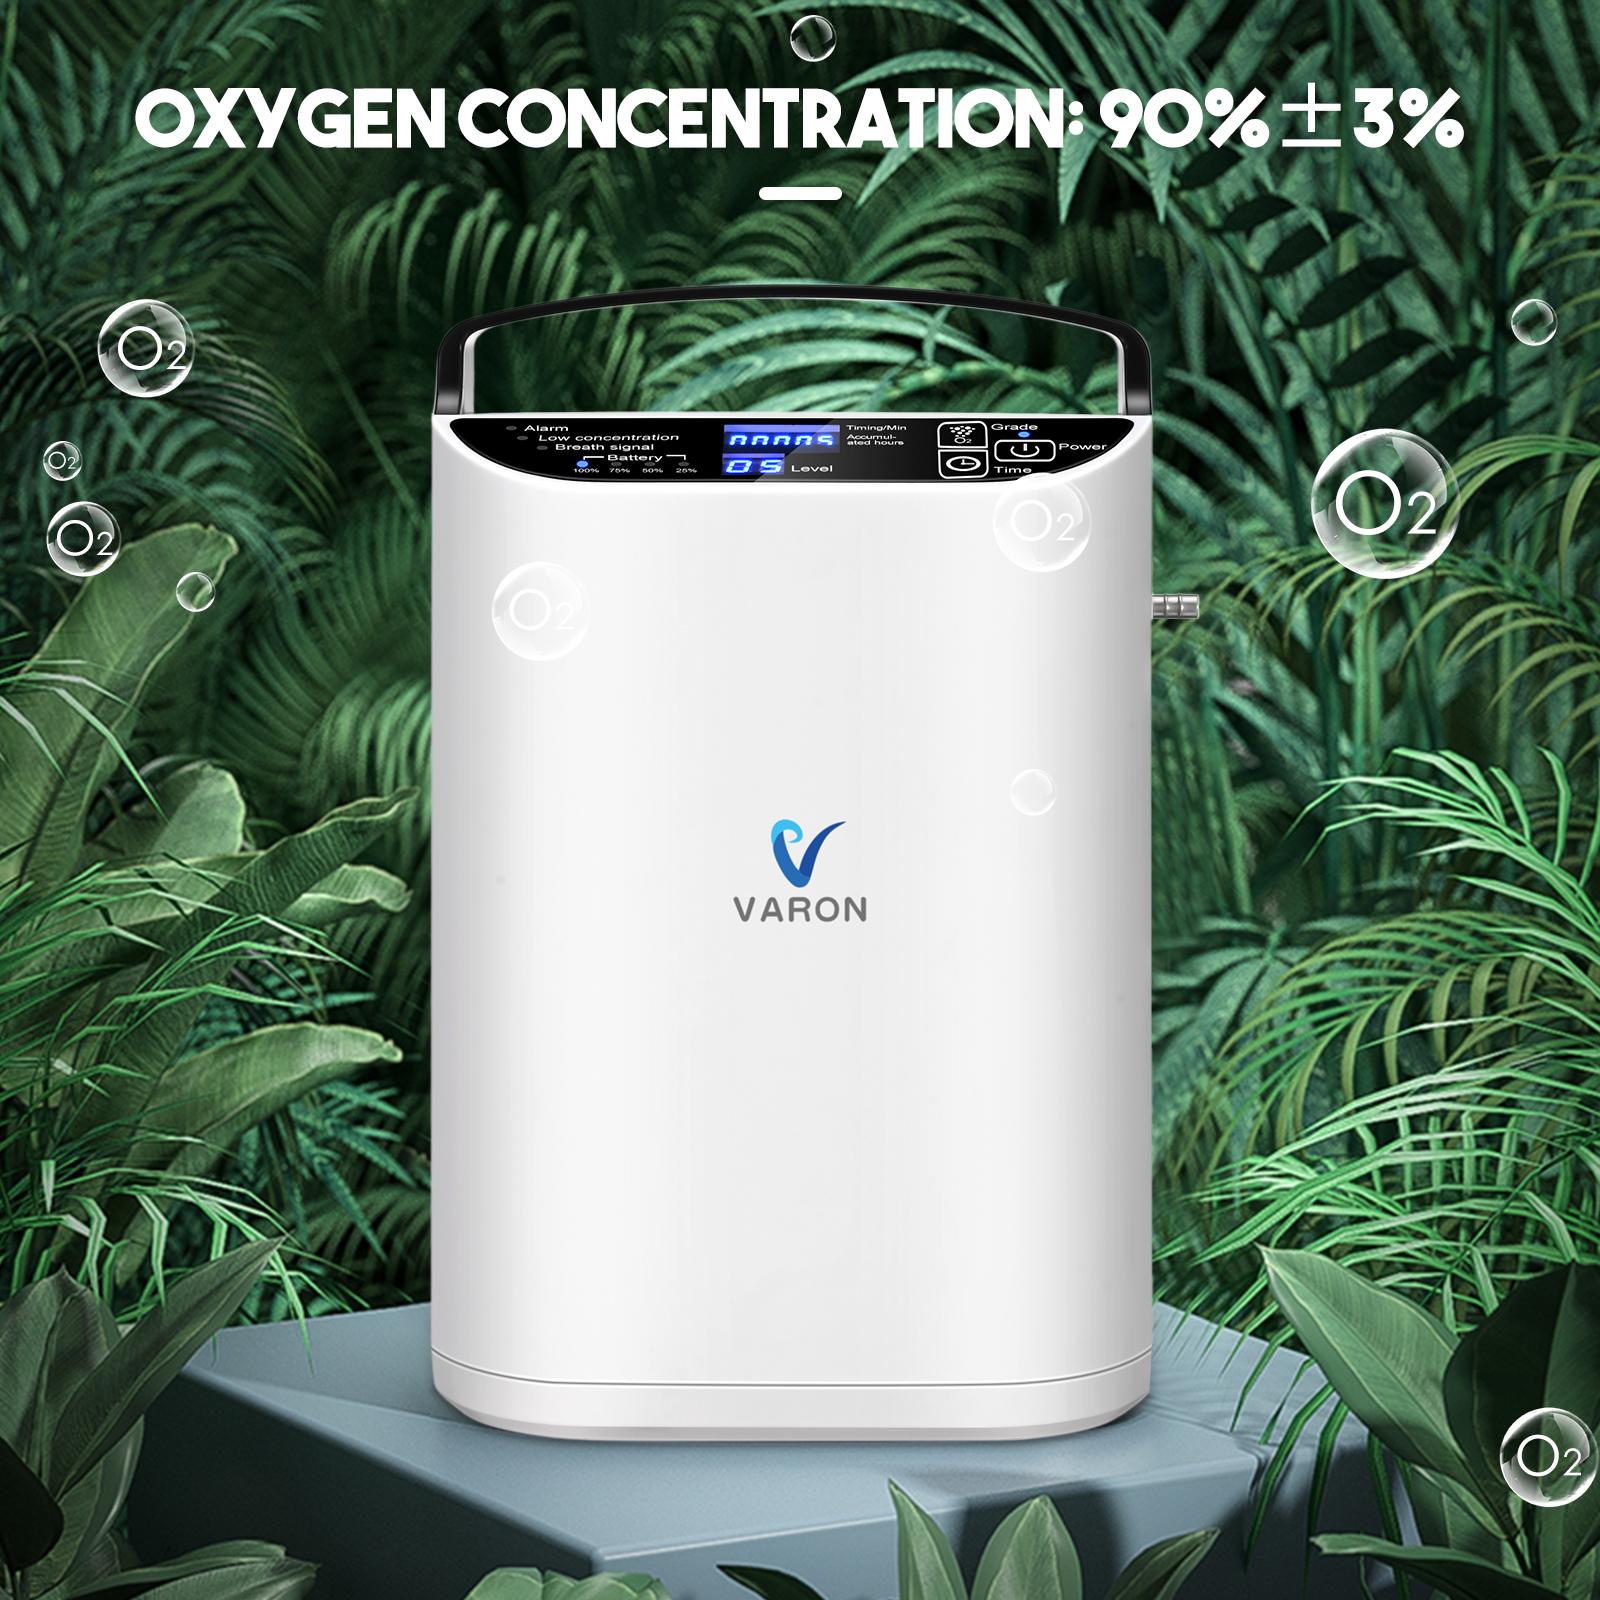 VARON Portable 5L Oxygen Concentrator 93% High concentration Oxygent Concentrator Oxygene Making Machine for Home and Travel